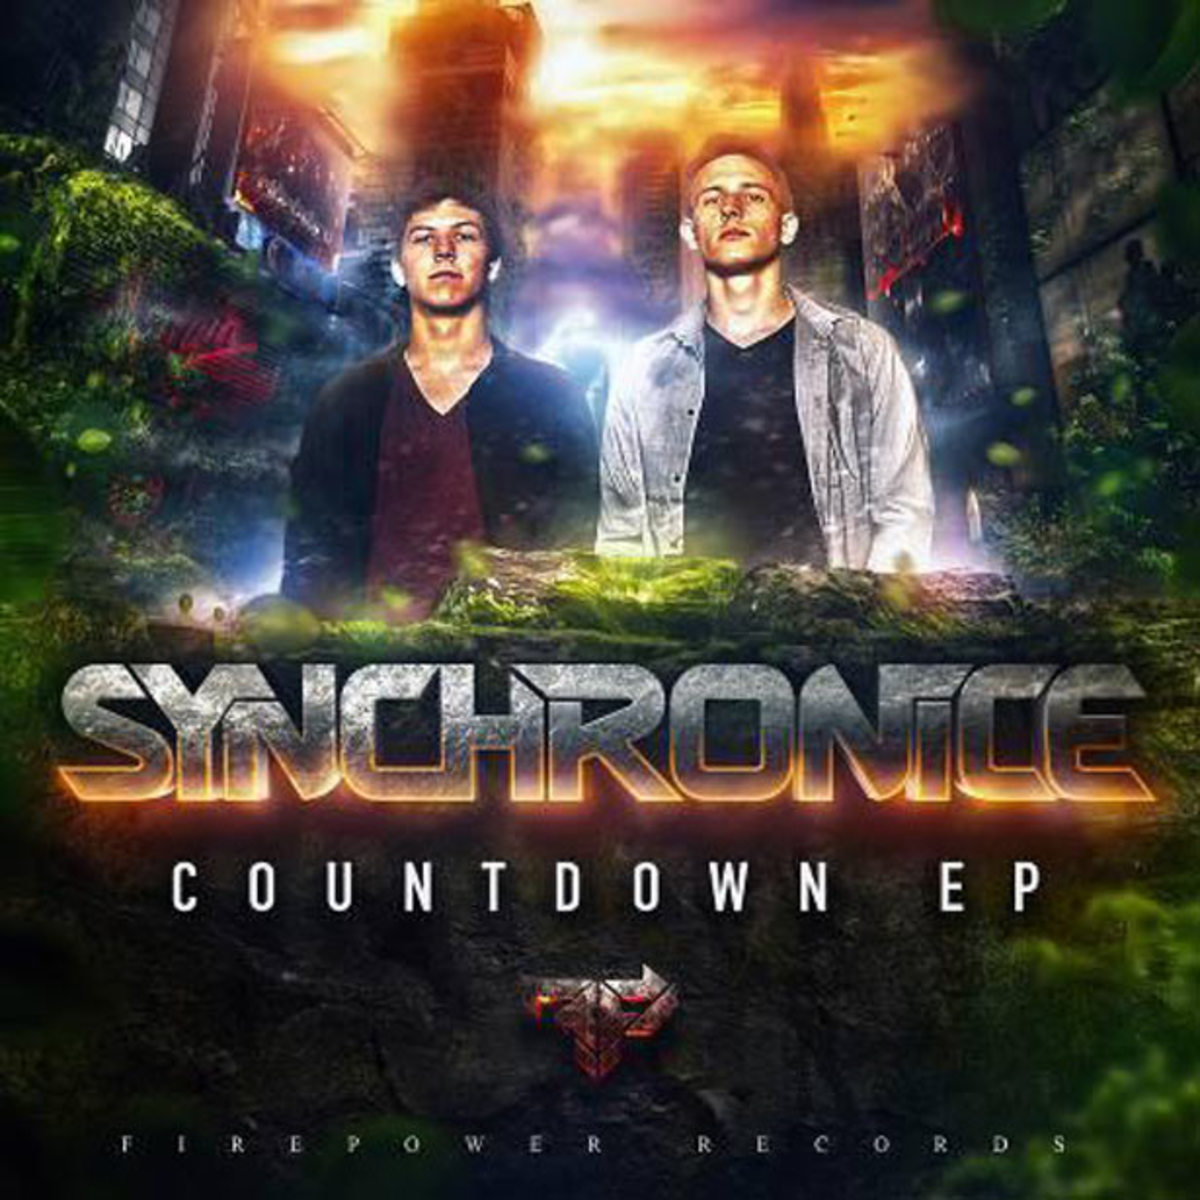 EDM News - Datsik's Firepower Records Set to Release Synchronice's Countdown EP June 18th